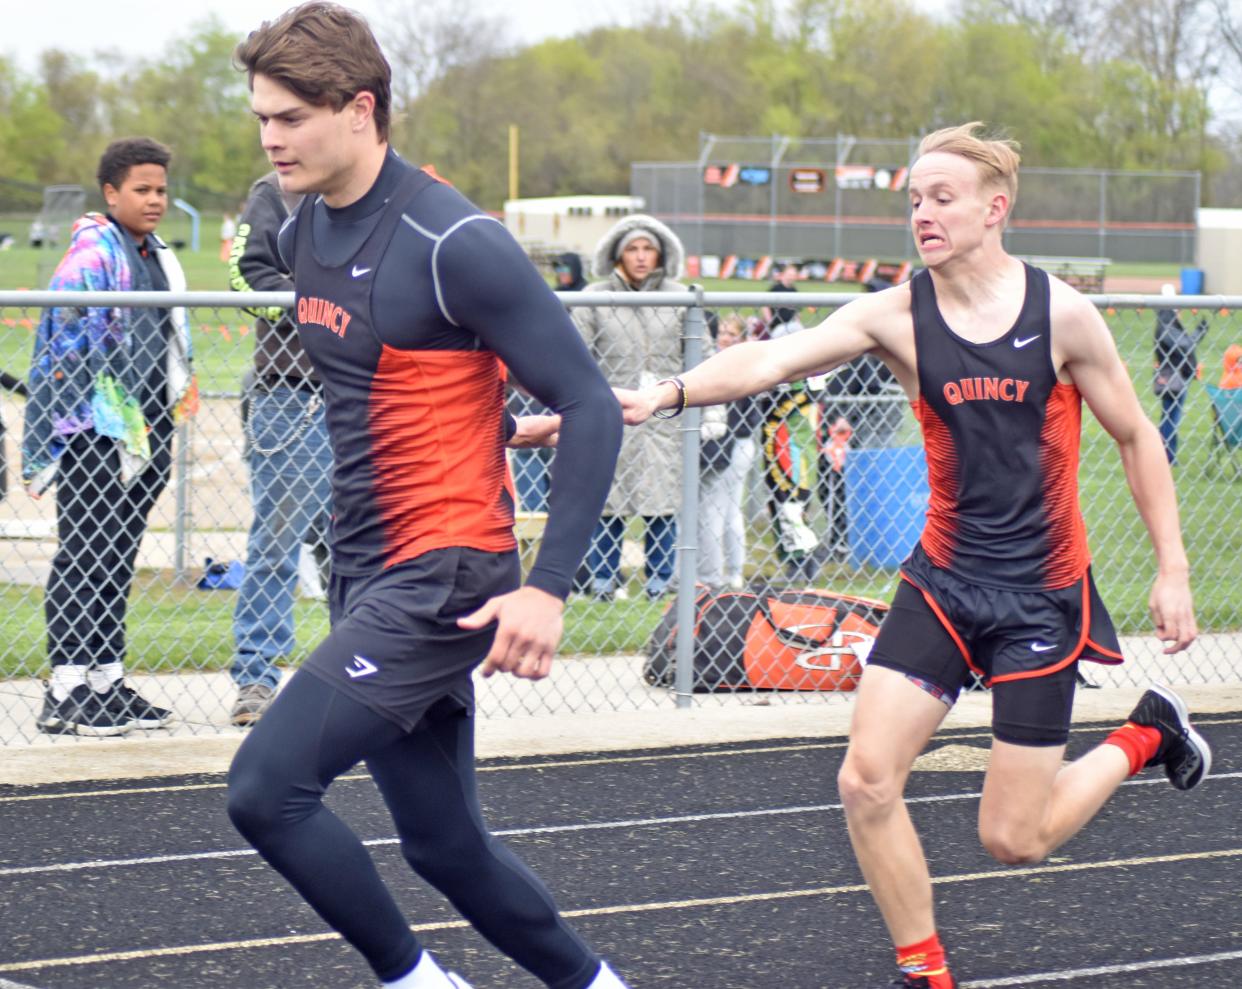 Quincy's Cameron Barry hands off to teammate Noah Rufenacht during the 800 meter relay